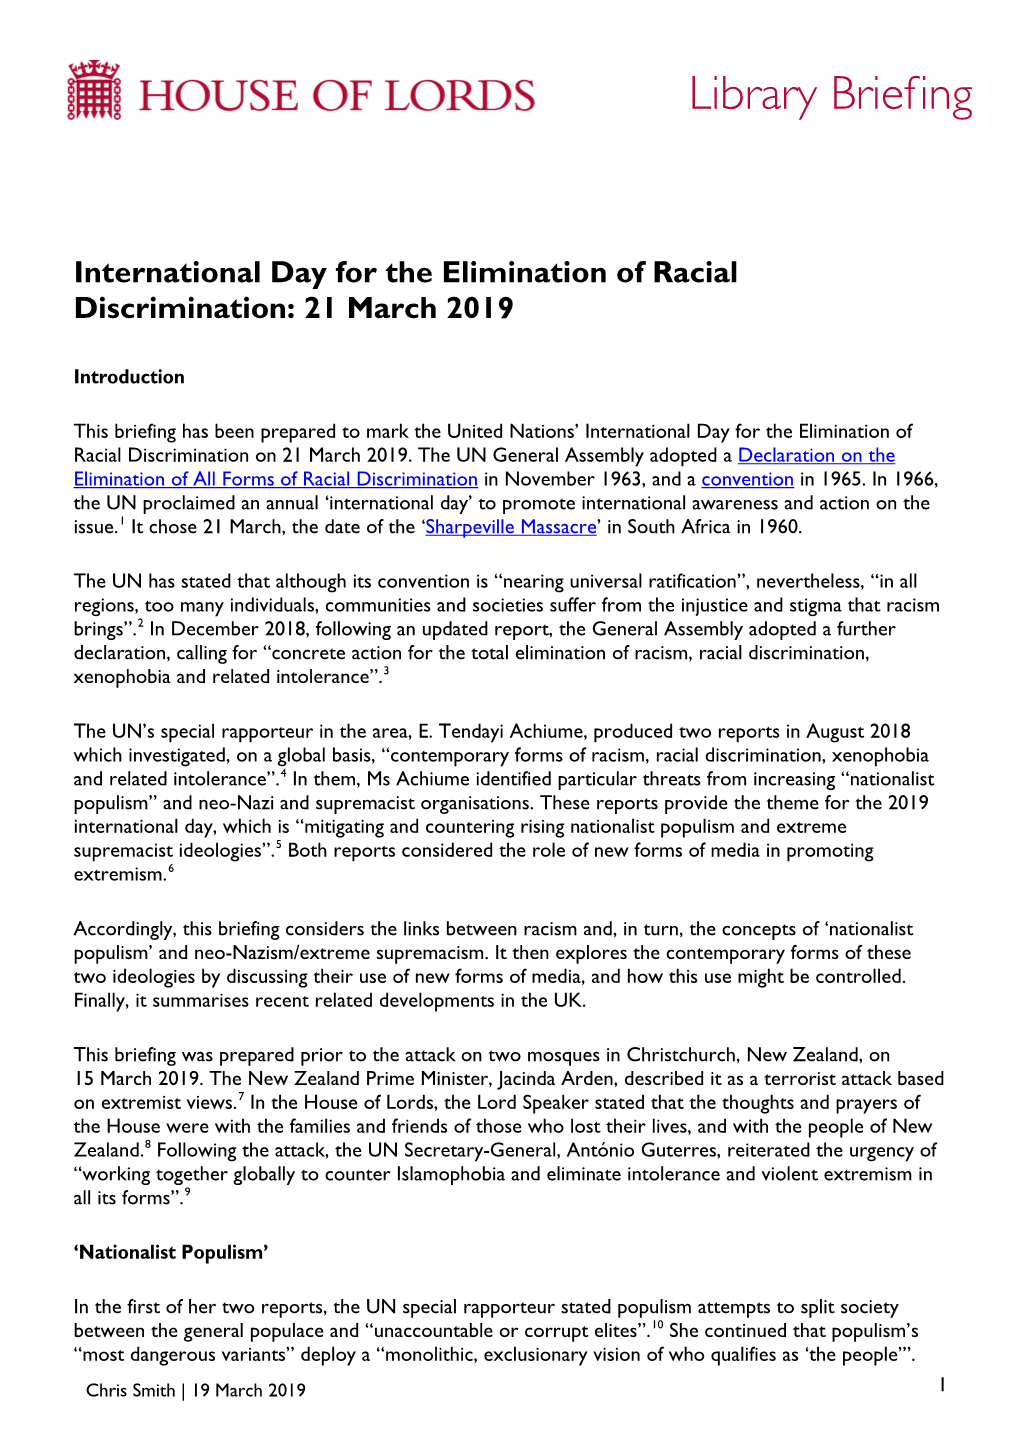 International Day for the Elimination of Racial Discrimination: 21 March 2019